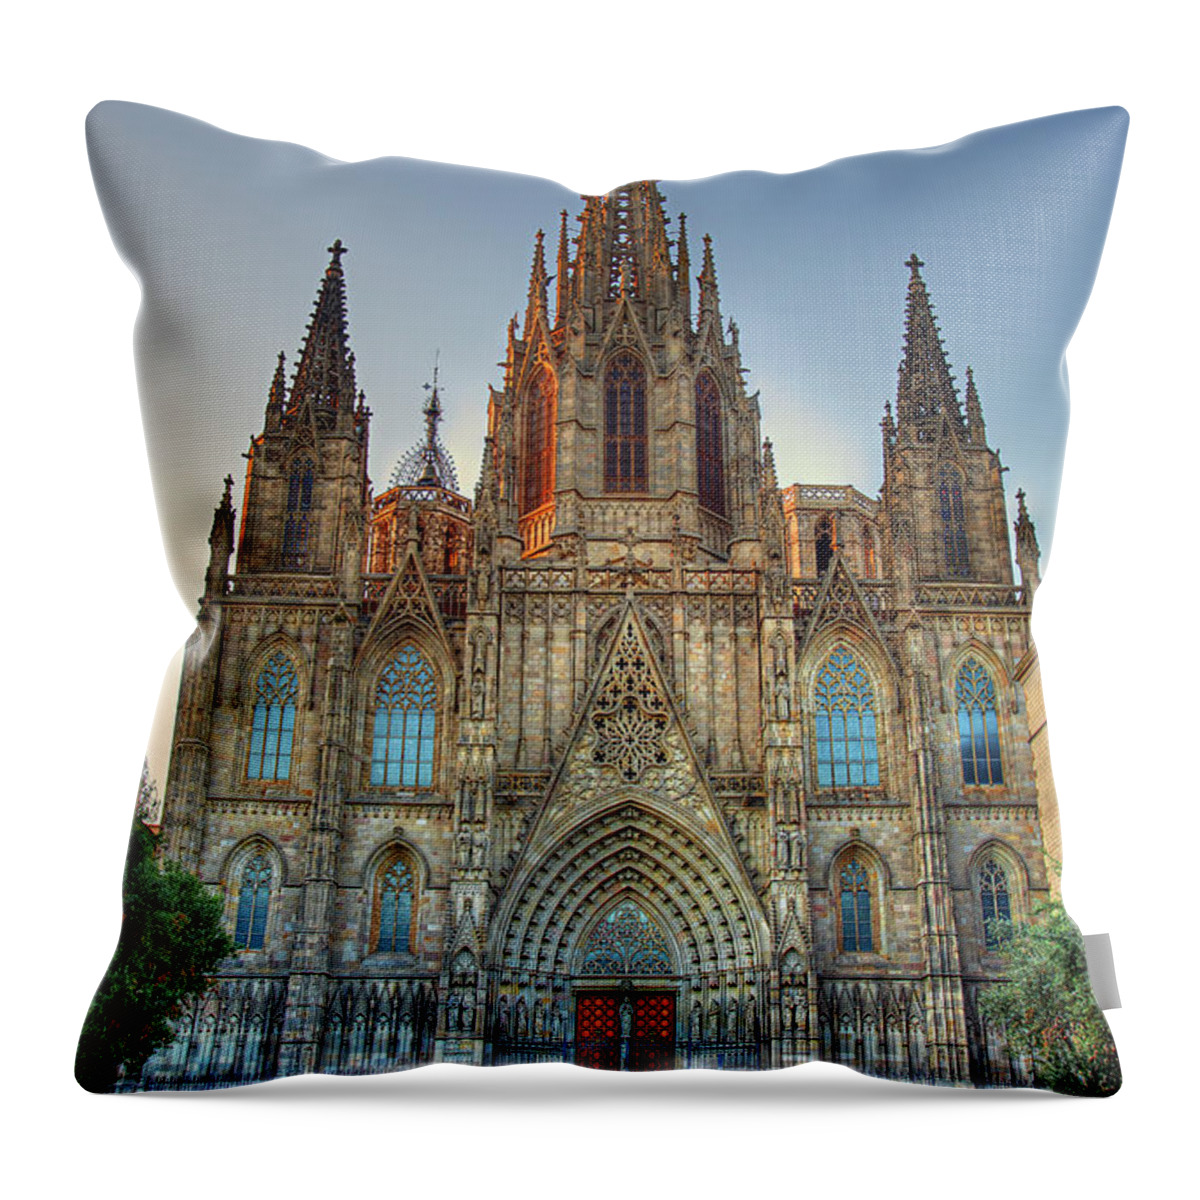 Barcelona Throw Pillow featuring the photograph Barcelona Cathedral by Peter Kennett